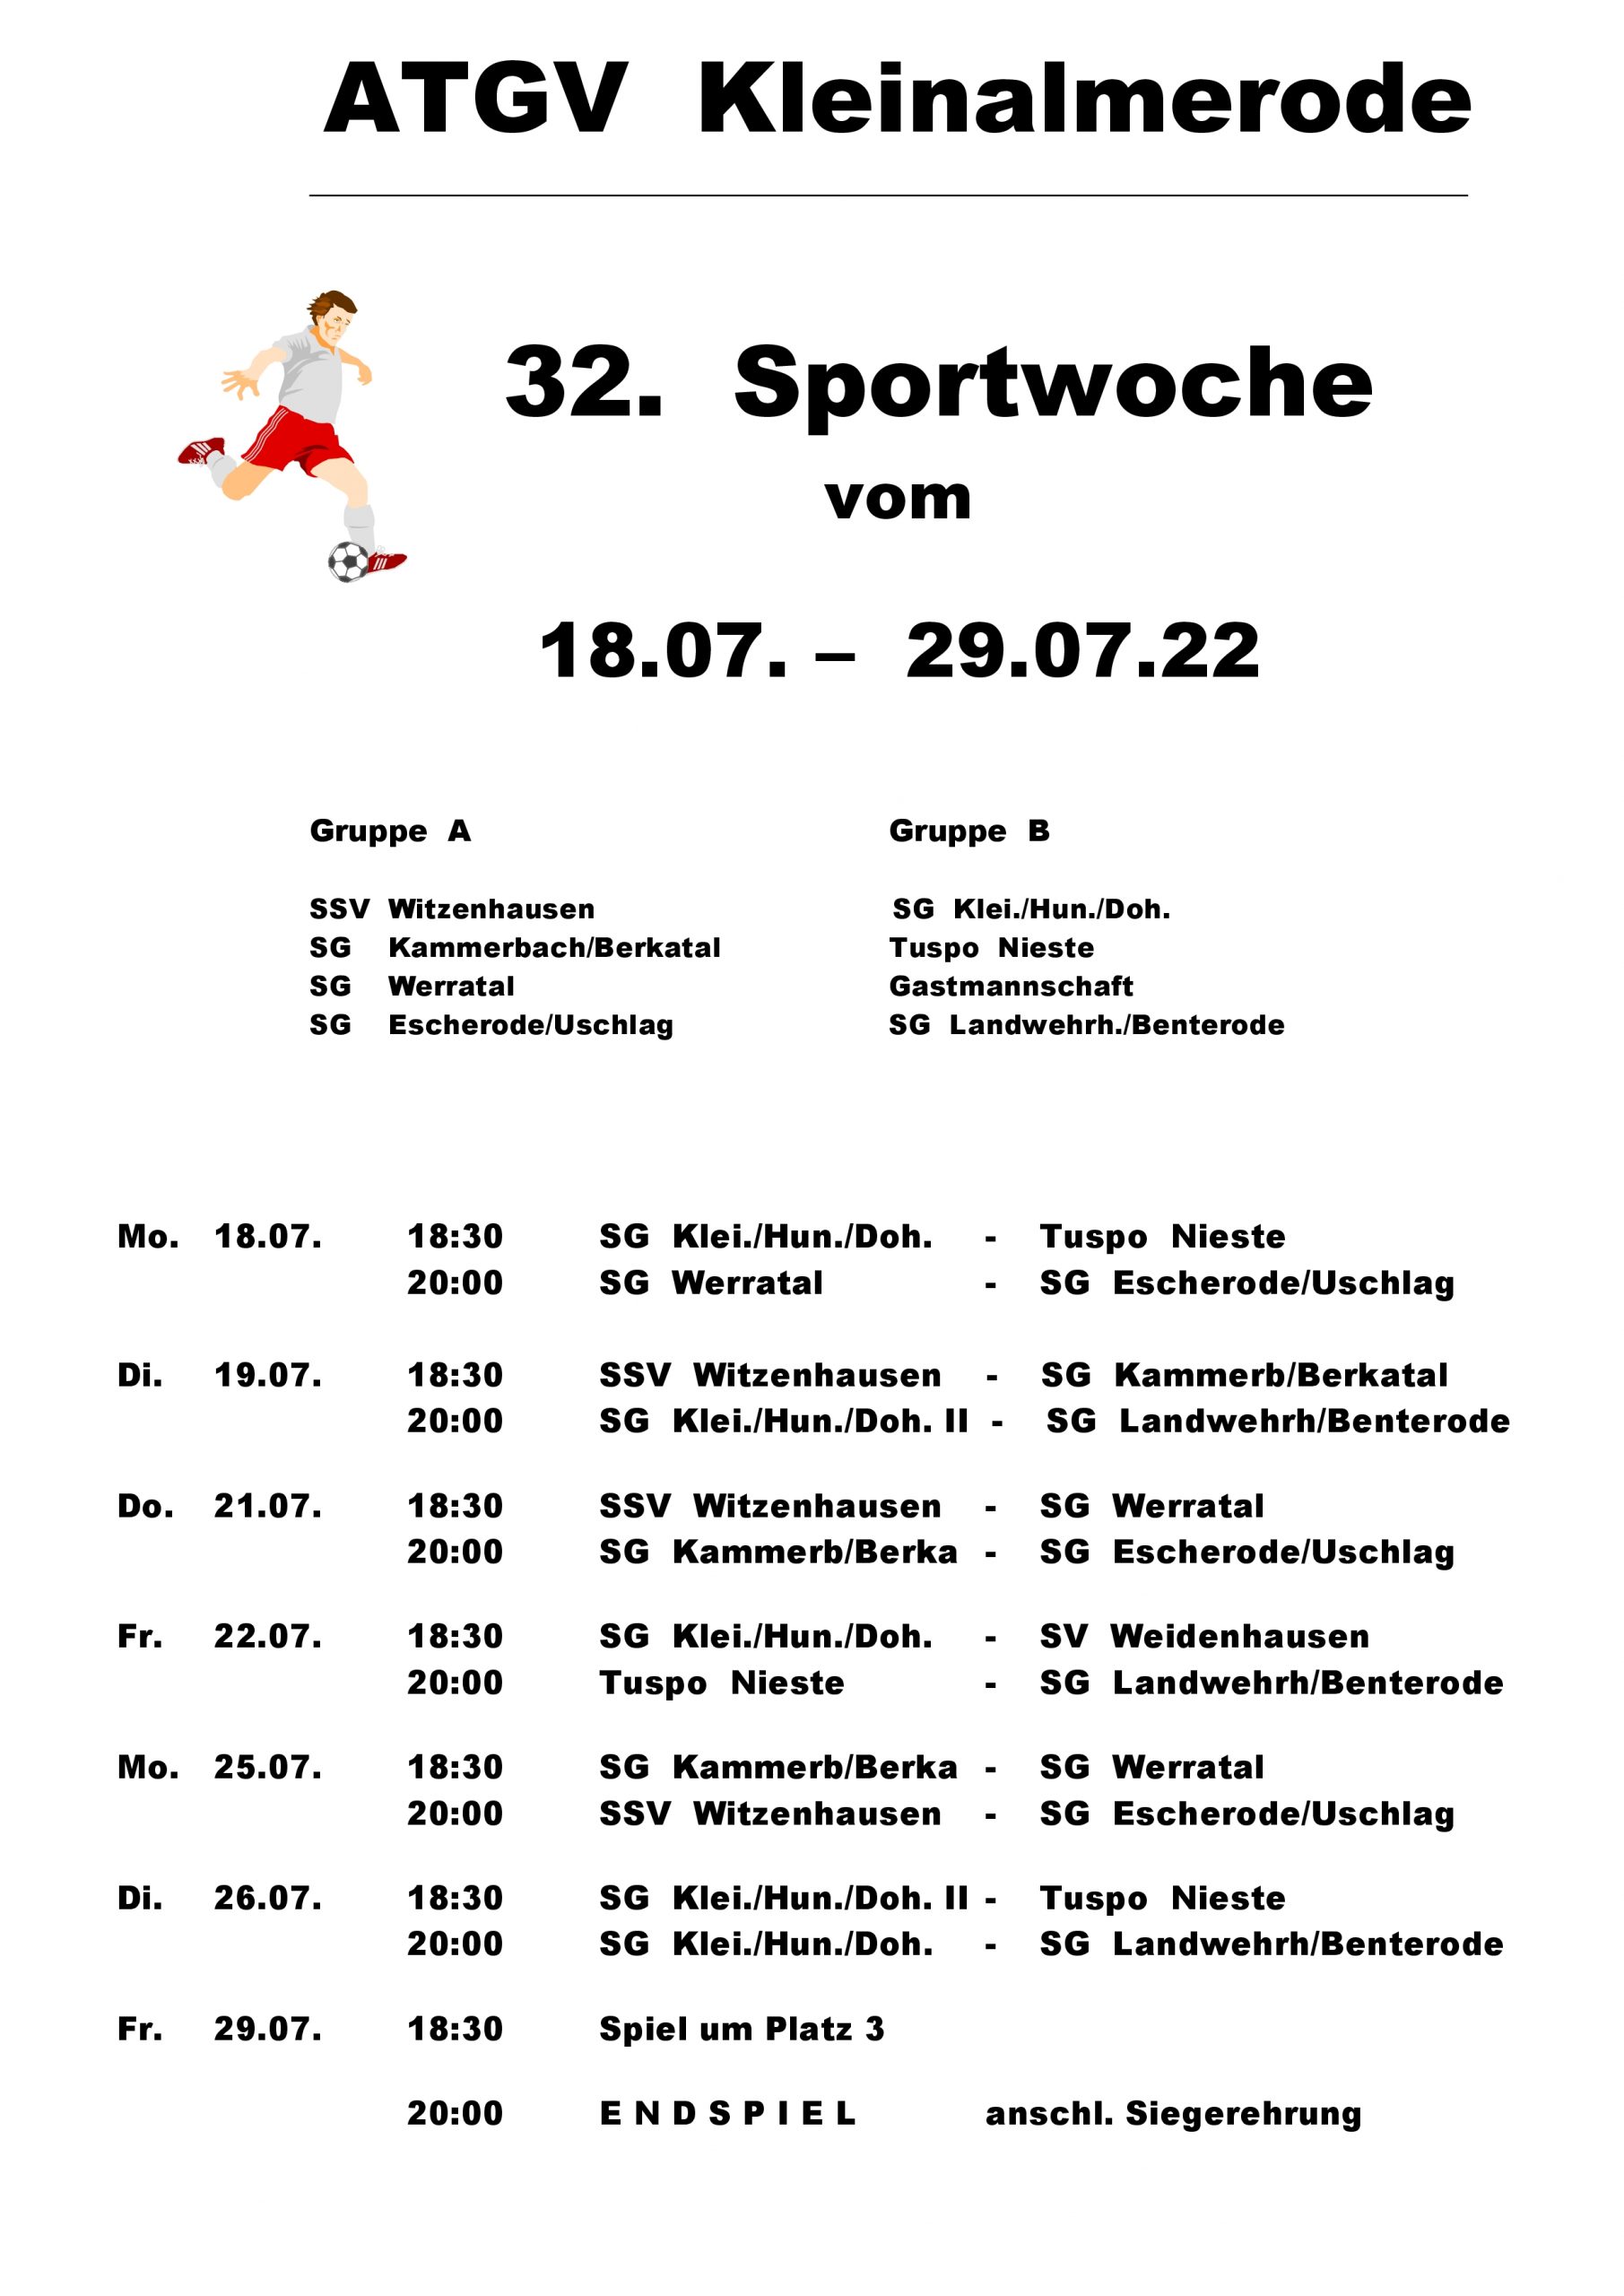 You are currently viewing +++ 32. Sportwoche Kleinalmerode +++